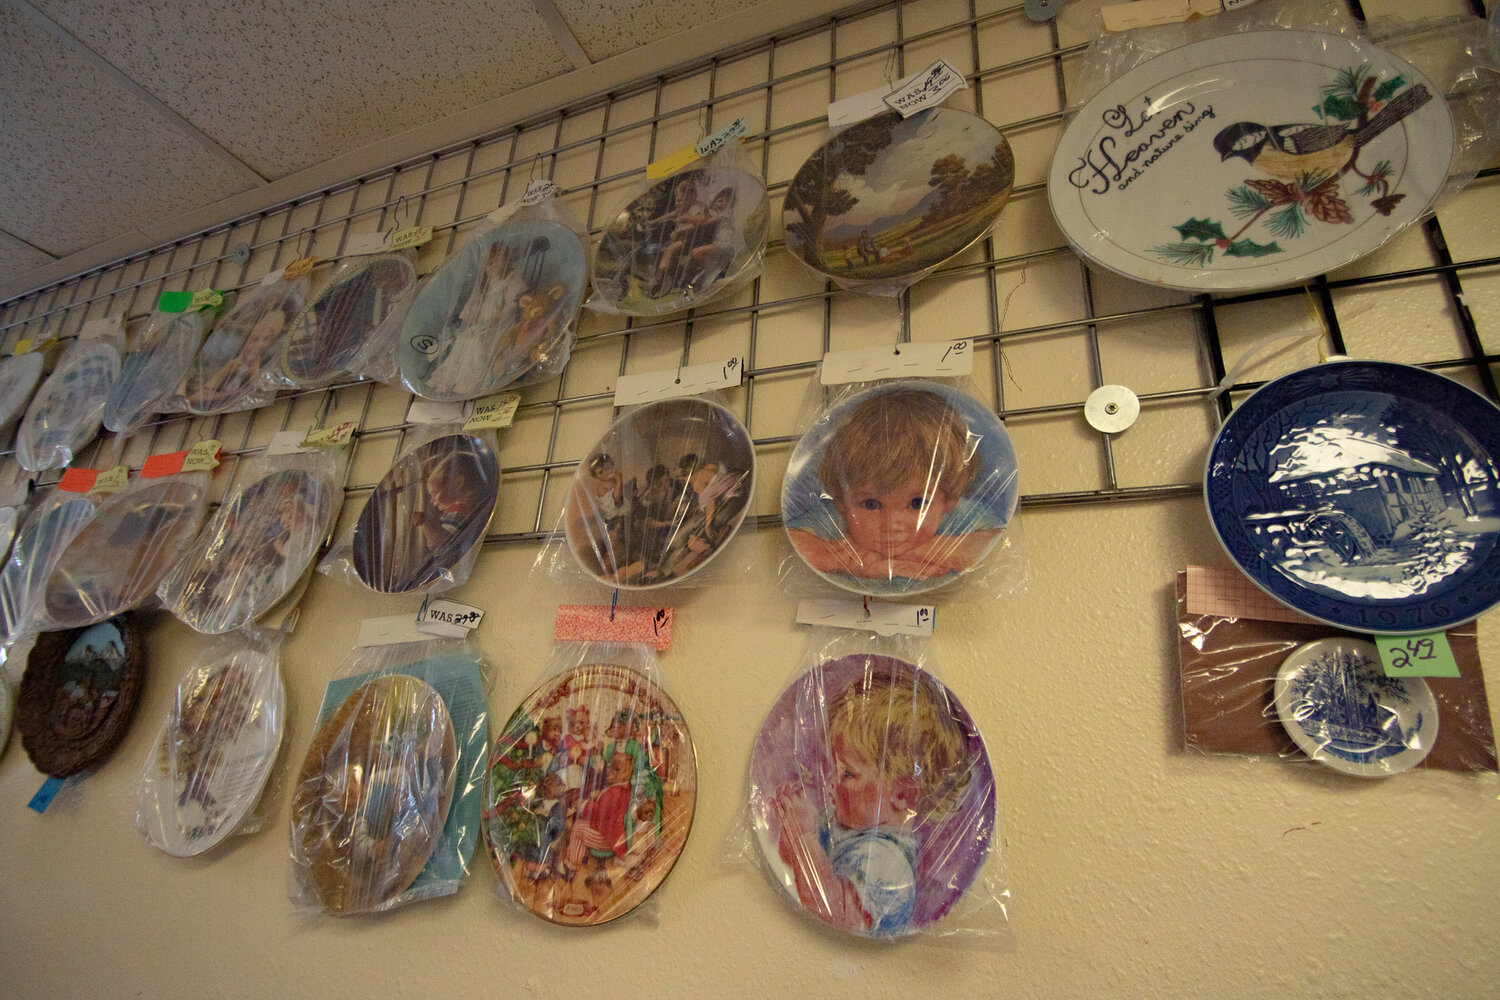 Collectible plates are seen hanging from the walls of Community Thrift in Centralia on Tuesday, Nov. 7.